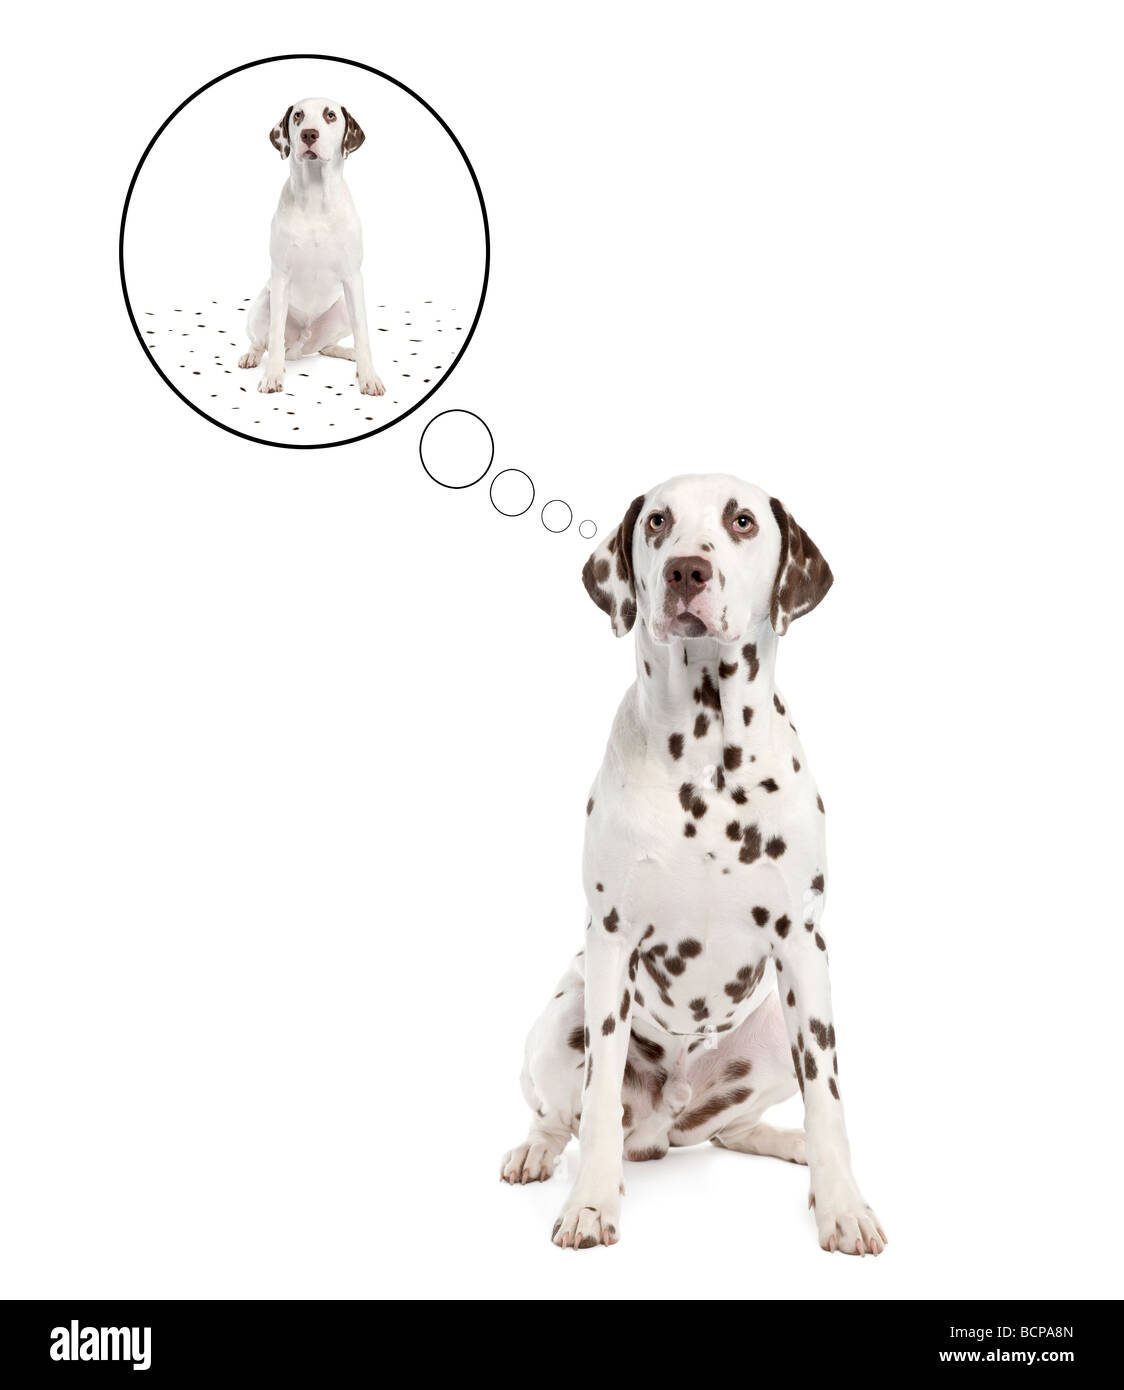 Dalmatian dog shedding its spots in idea bubble in front of a white background, studio shot Stock Photo